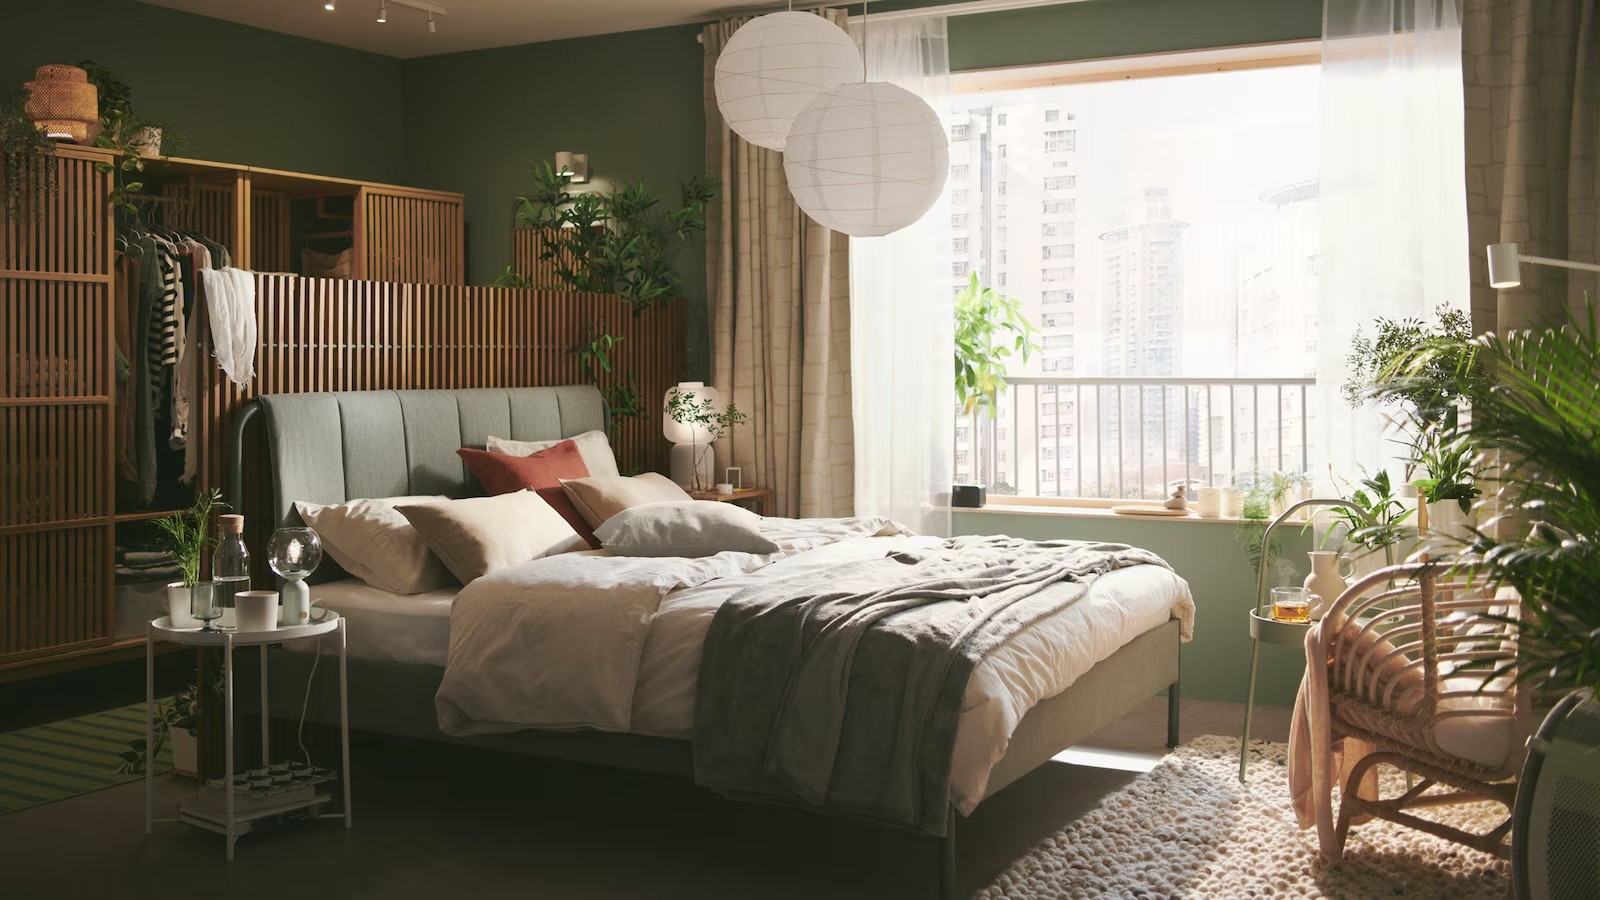 Transform Your Space: Green Bedroom Ideas That Inspire